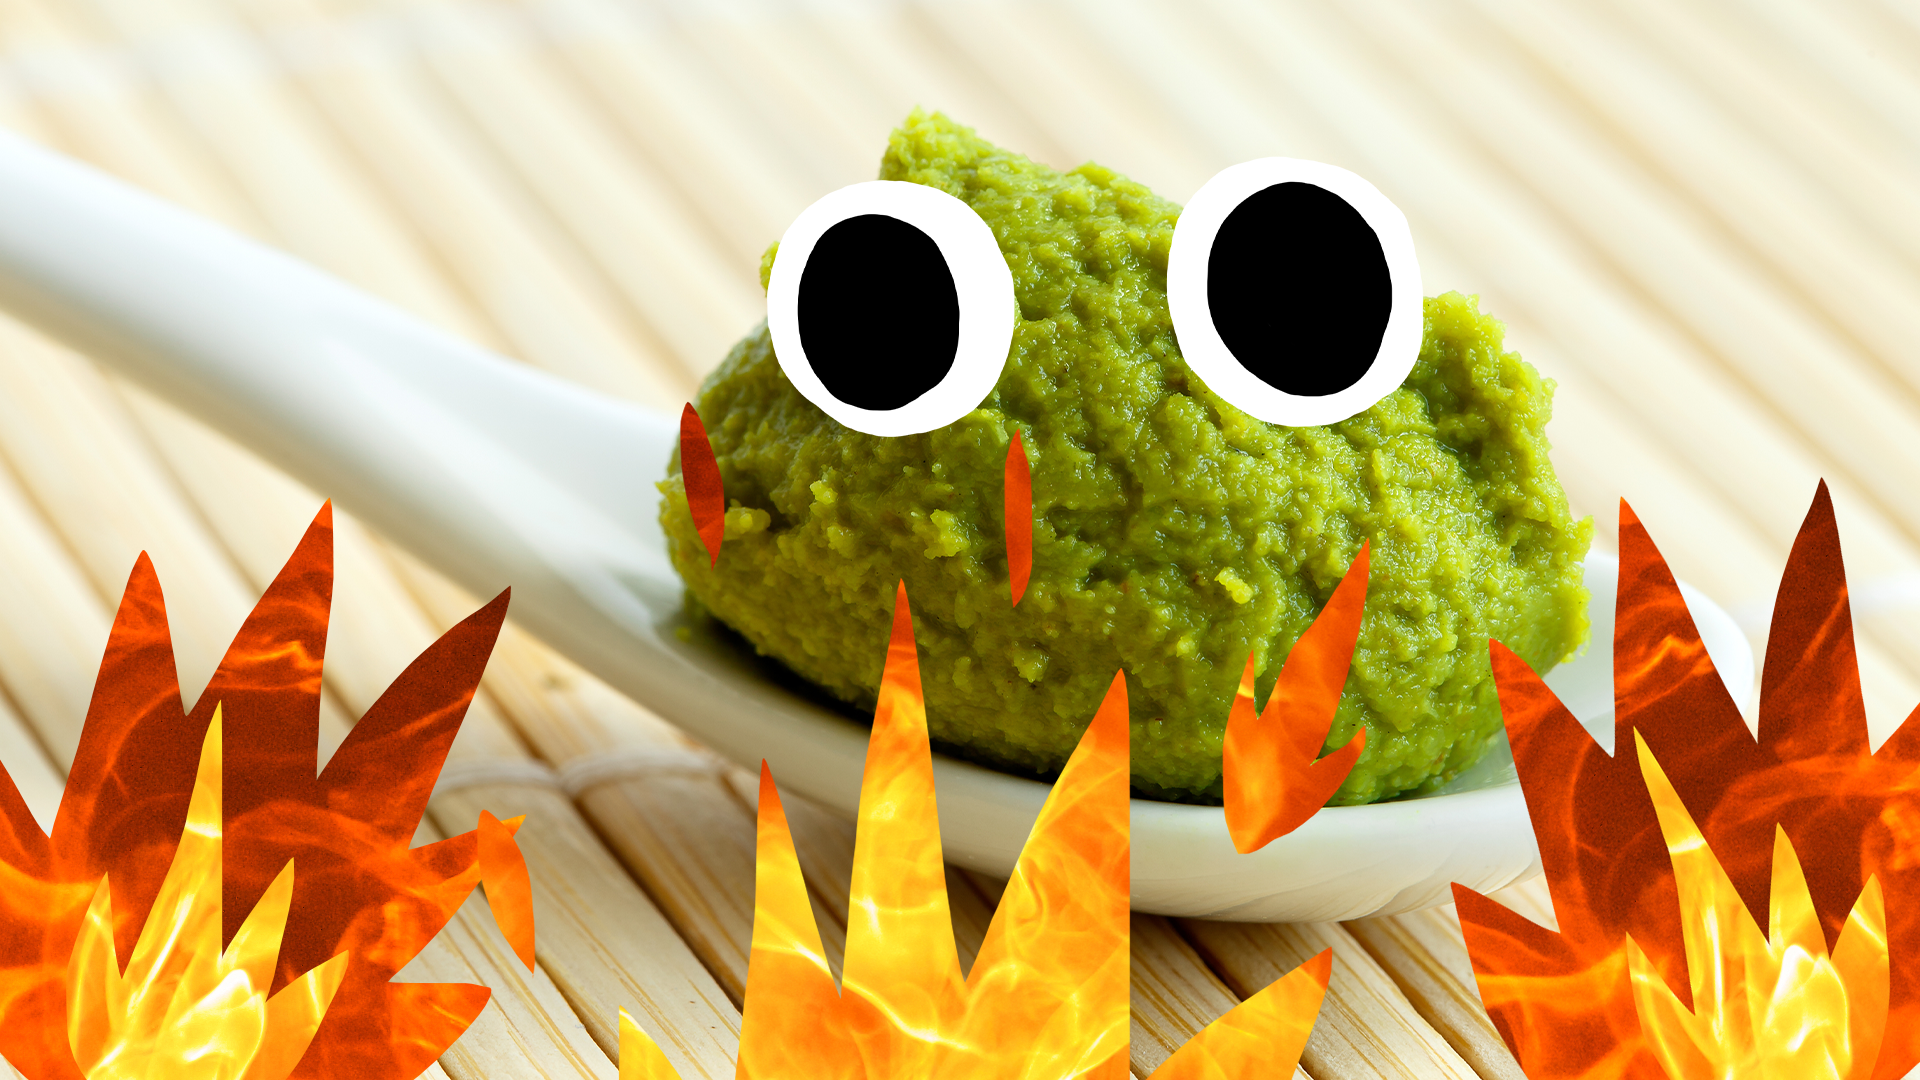 Some wasabi with eyes and fire